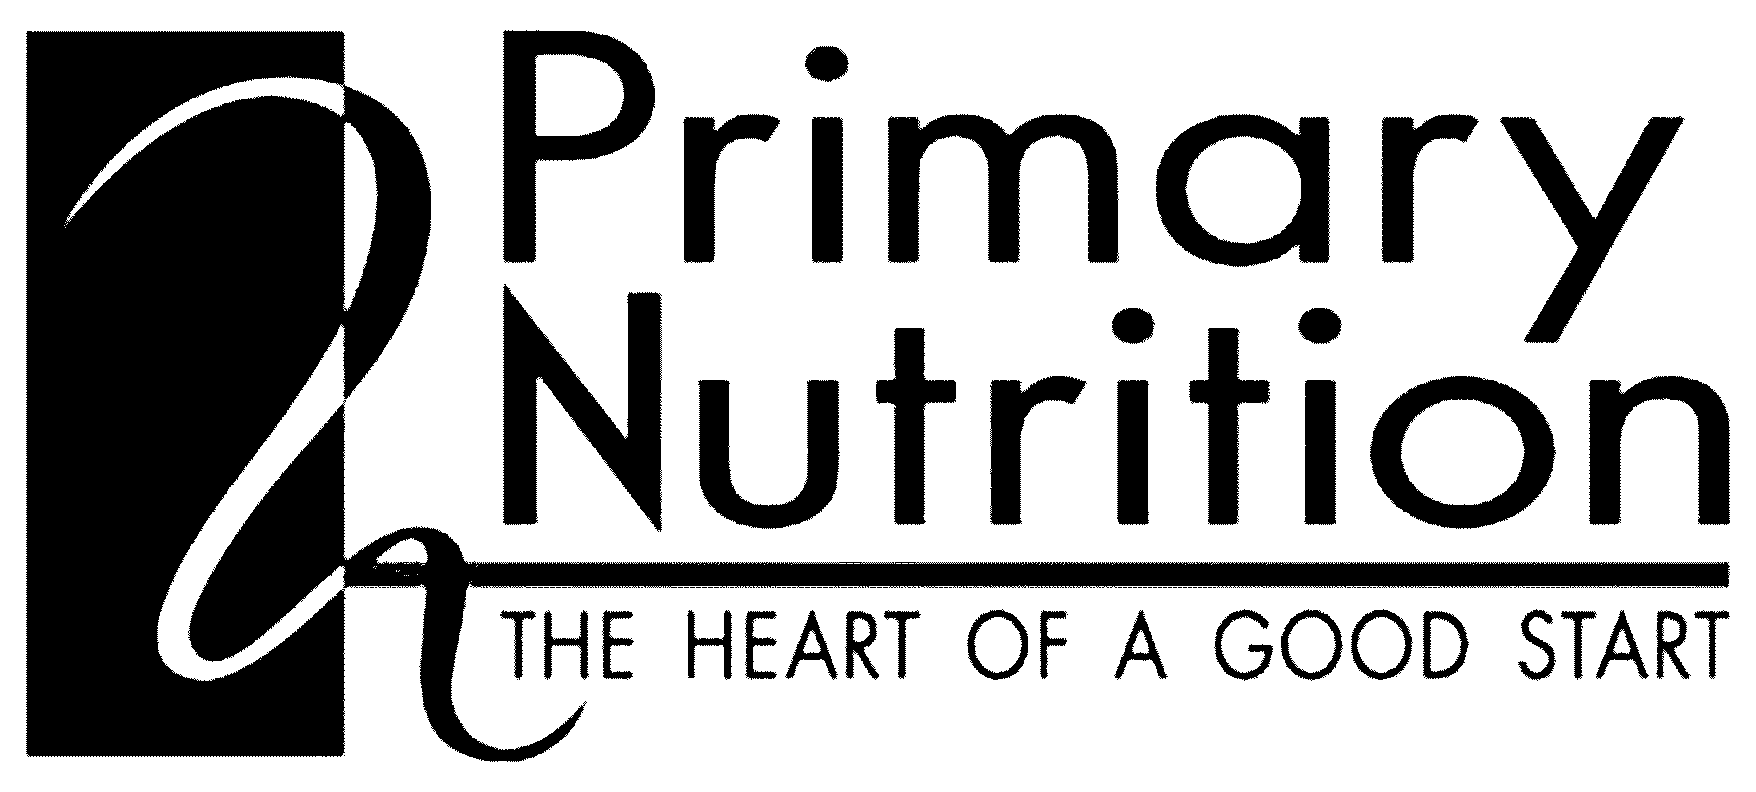 Trademark Logo PRIMARY NUTRITION THE HEART OF A GOOD START